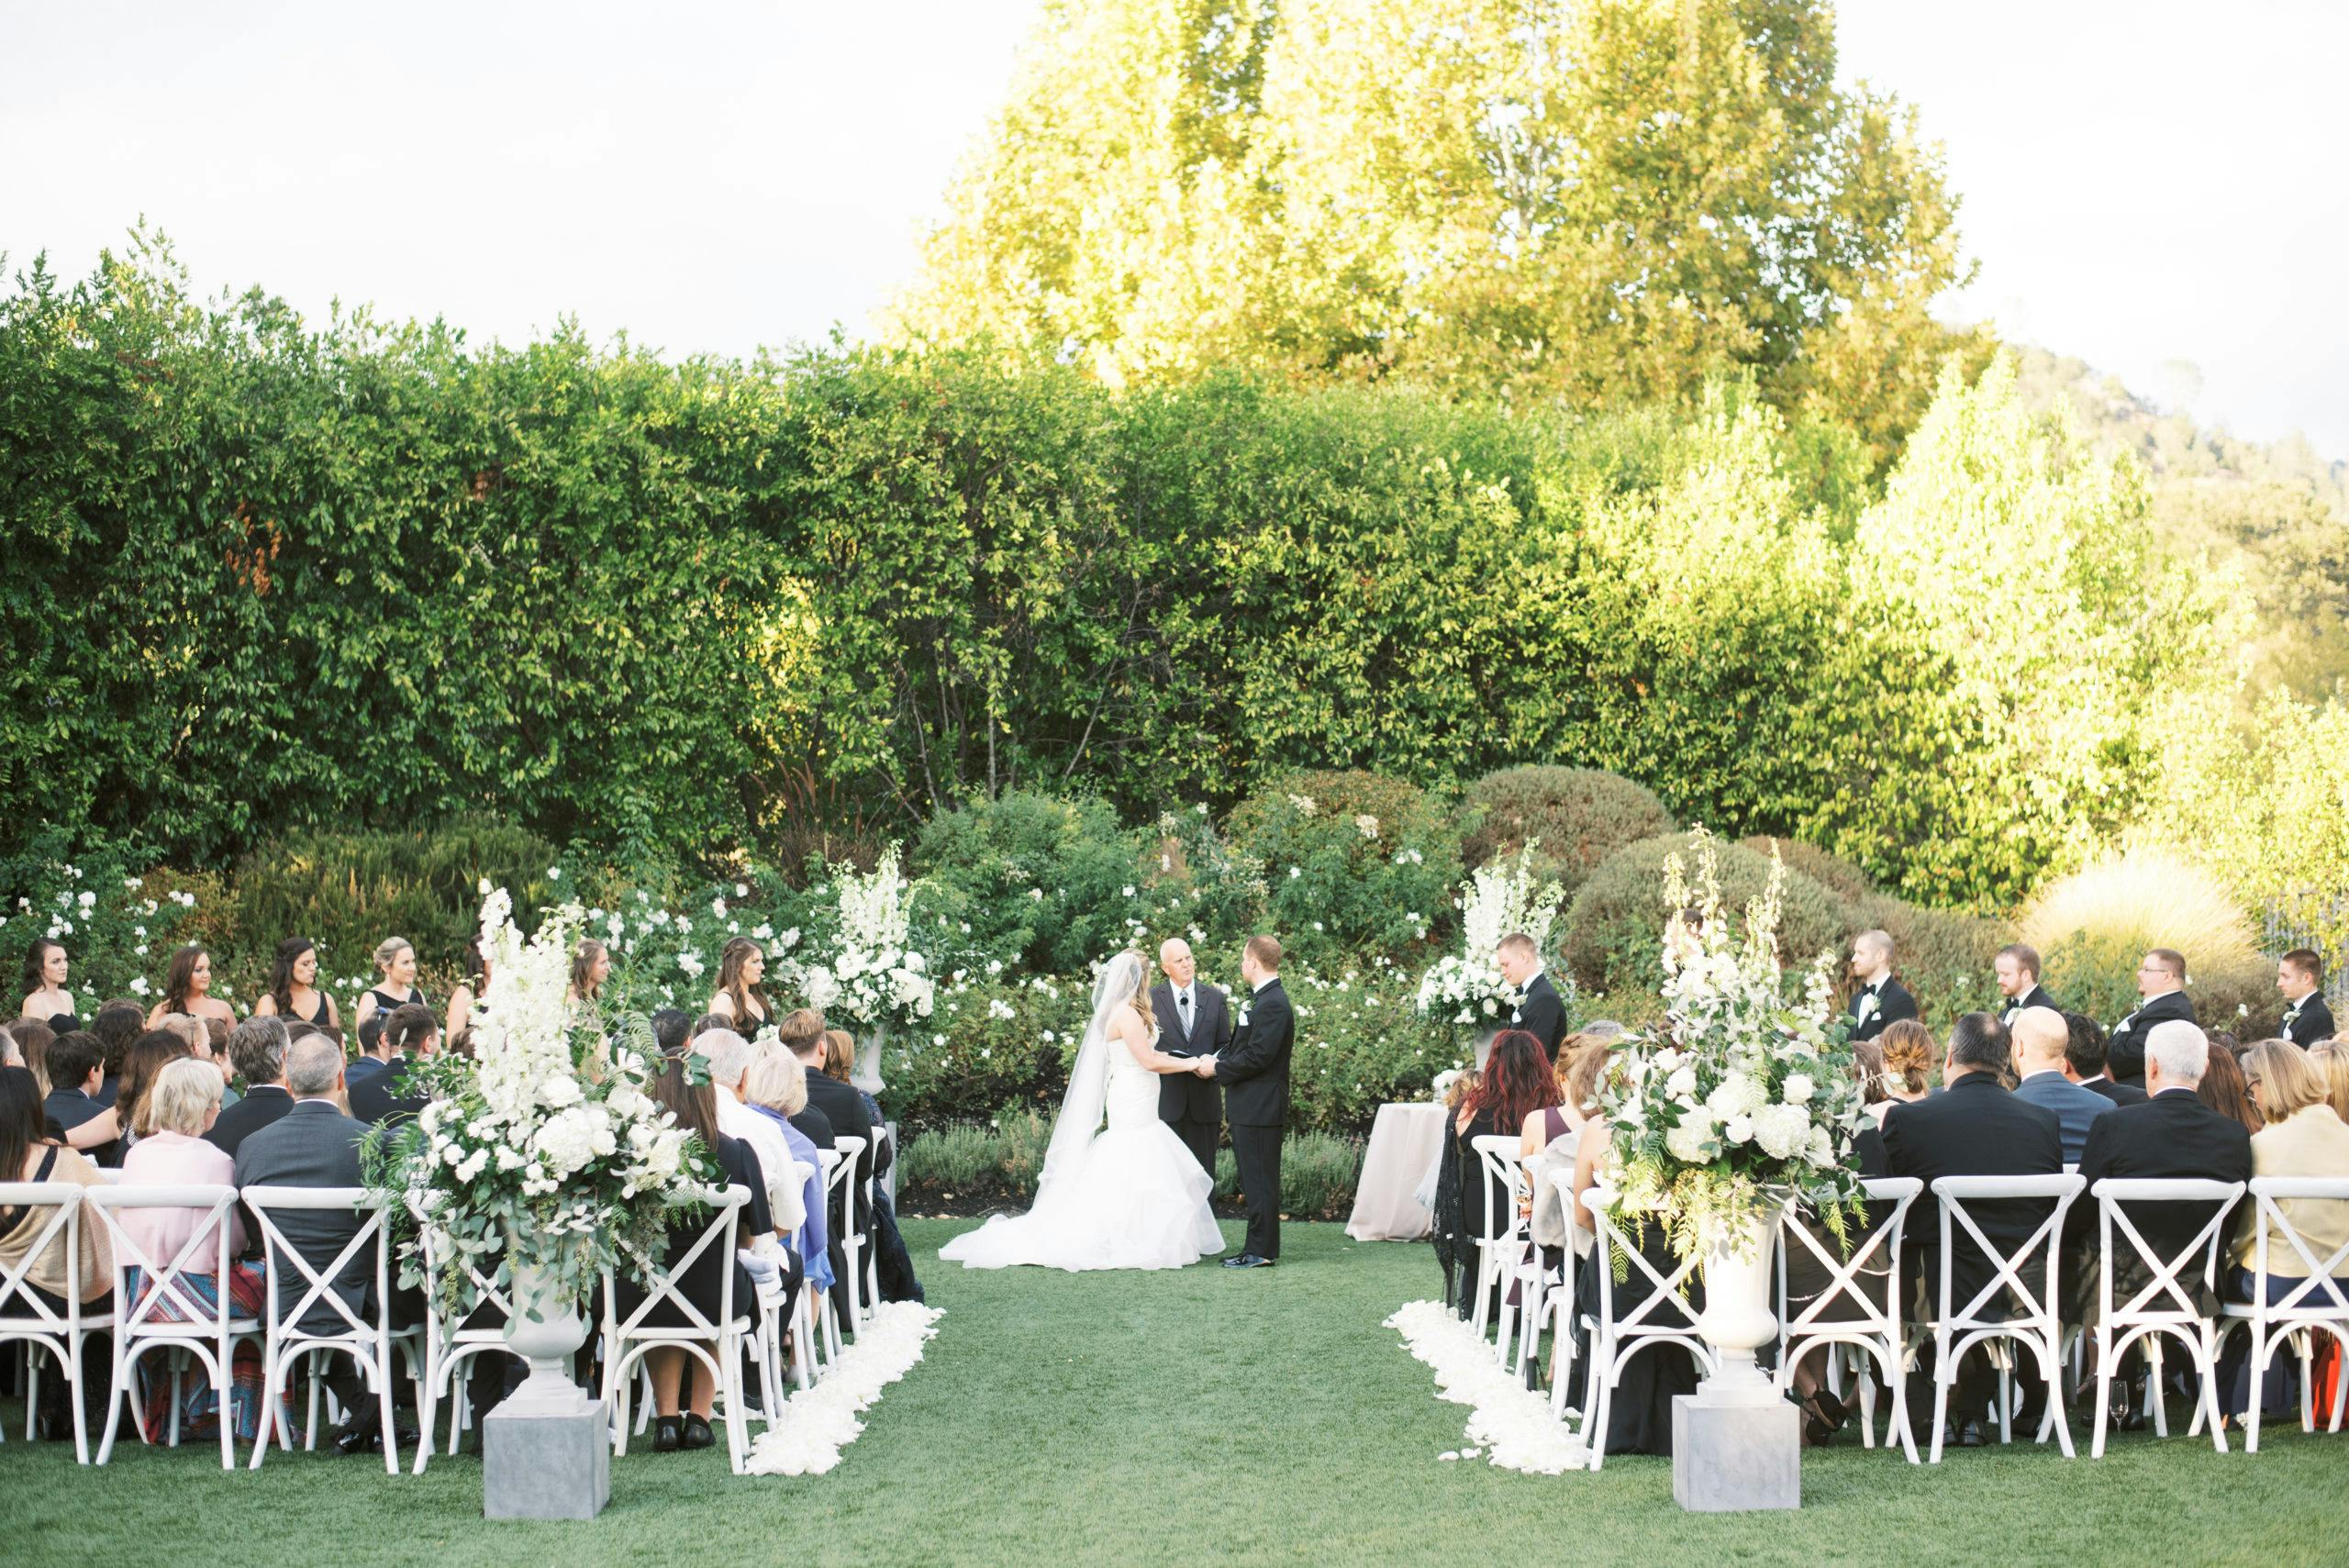 Elegant White Wedding at Solage, Auberge Resorts Collection in Calistoga, CA | PartySlate